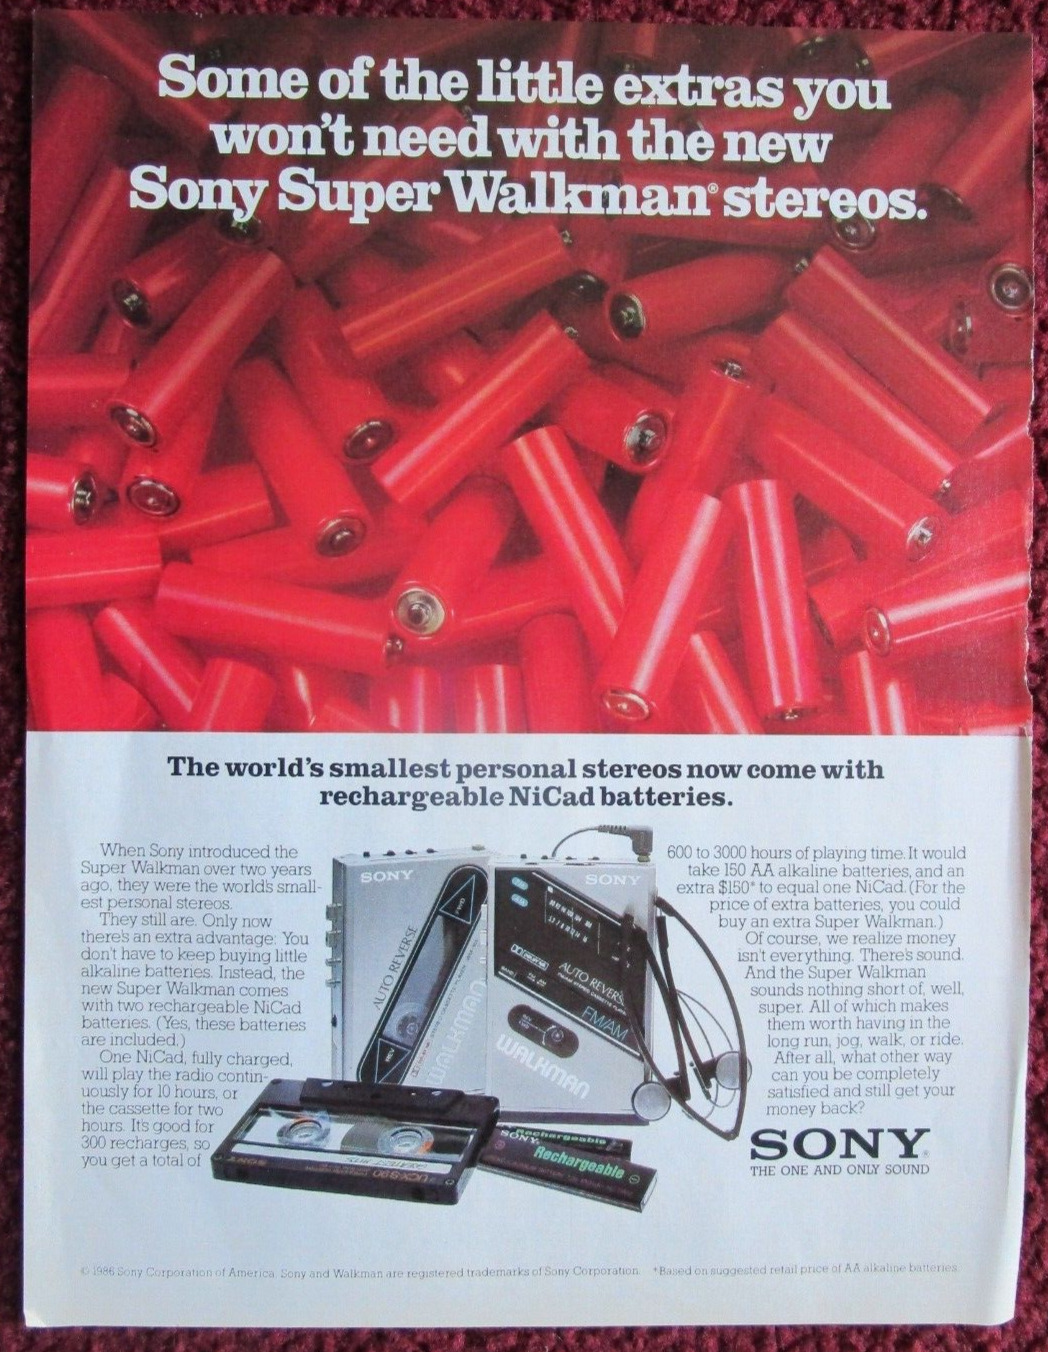 1986 SONY WALKMAN Portable Personal Stereo Print Ad ~ Recharge NICad Batteries